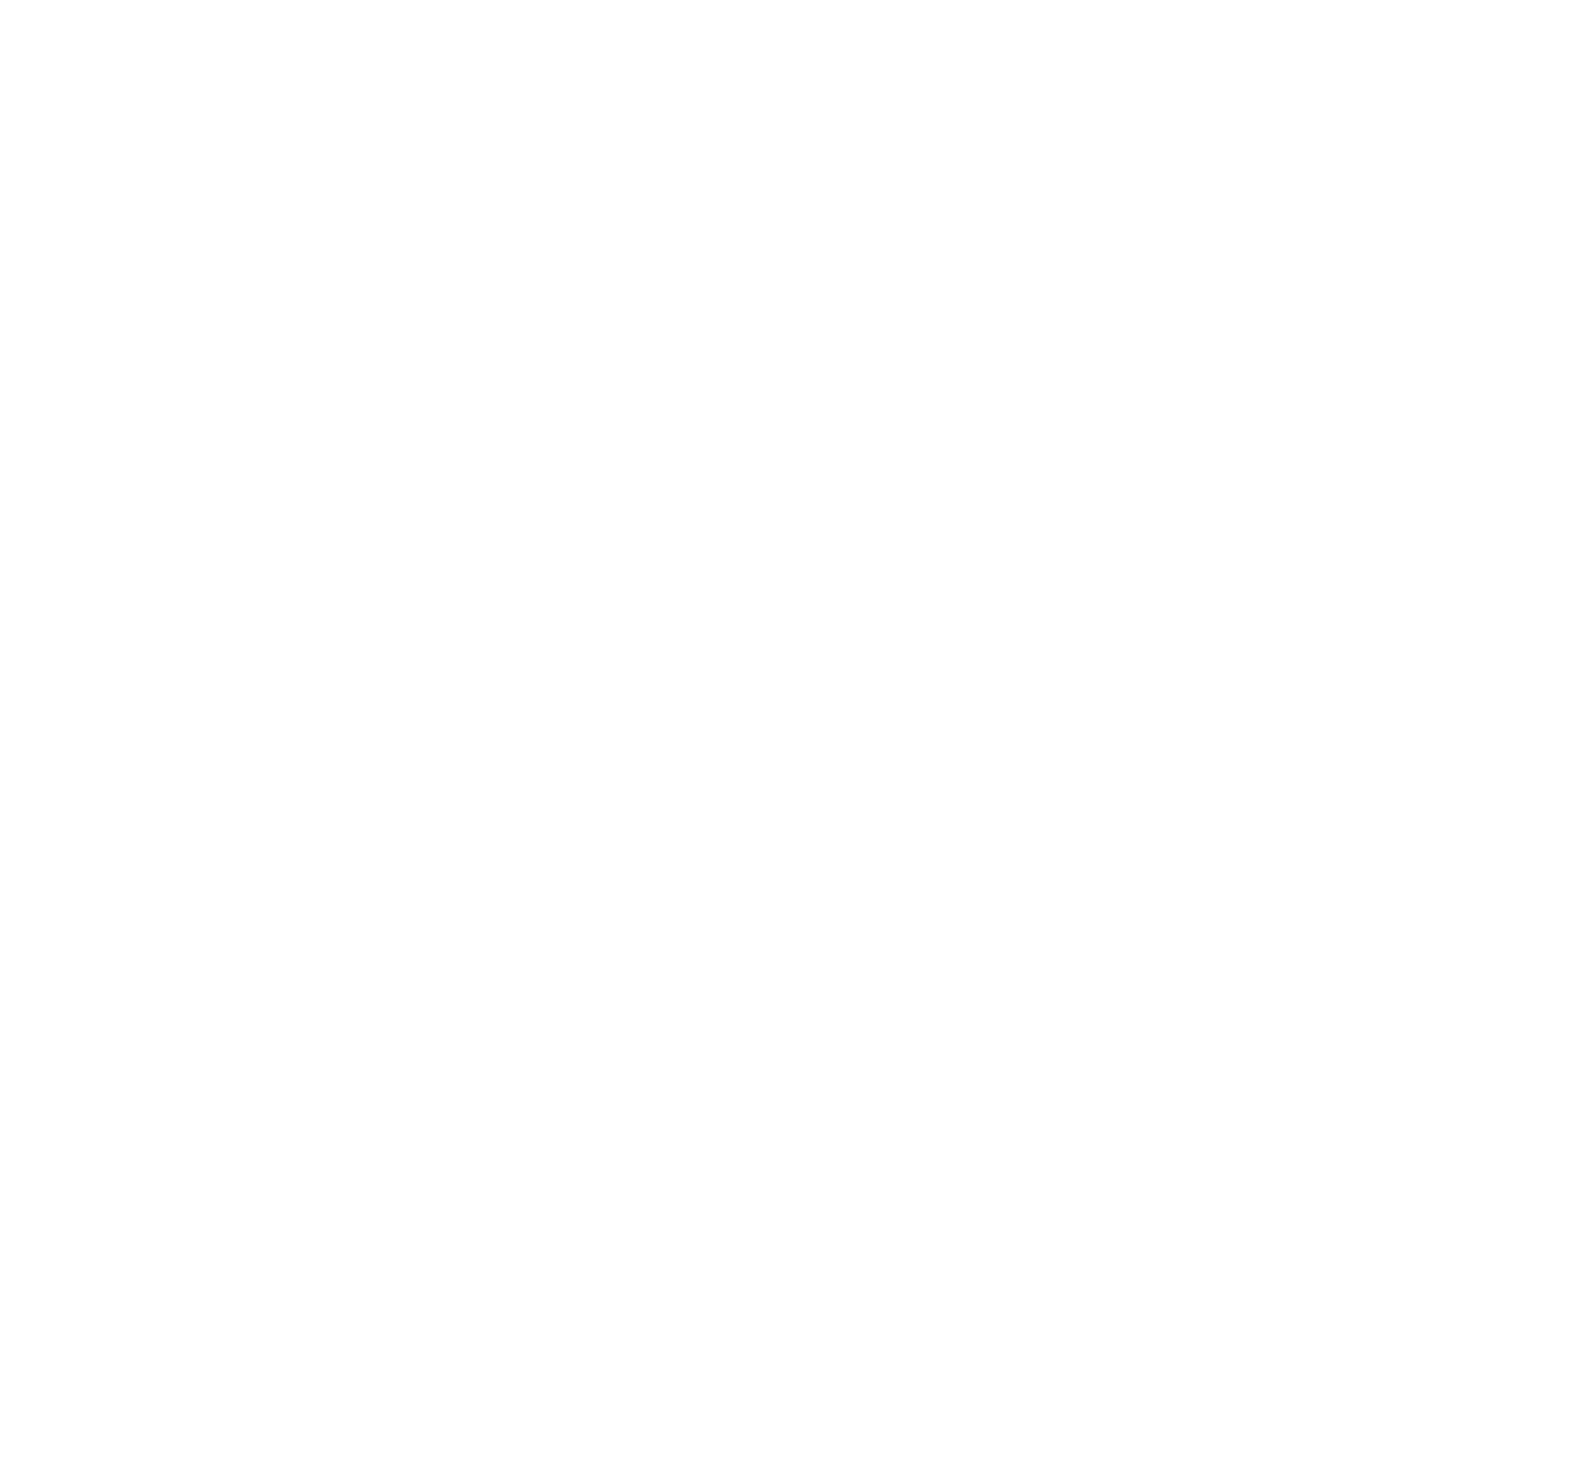 Eastern Province Cement Company logo for dark backgrounds (transparent PNG)